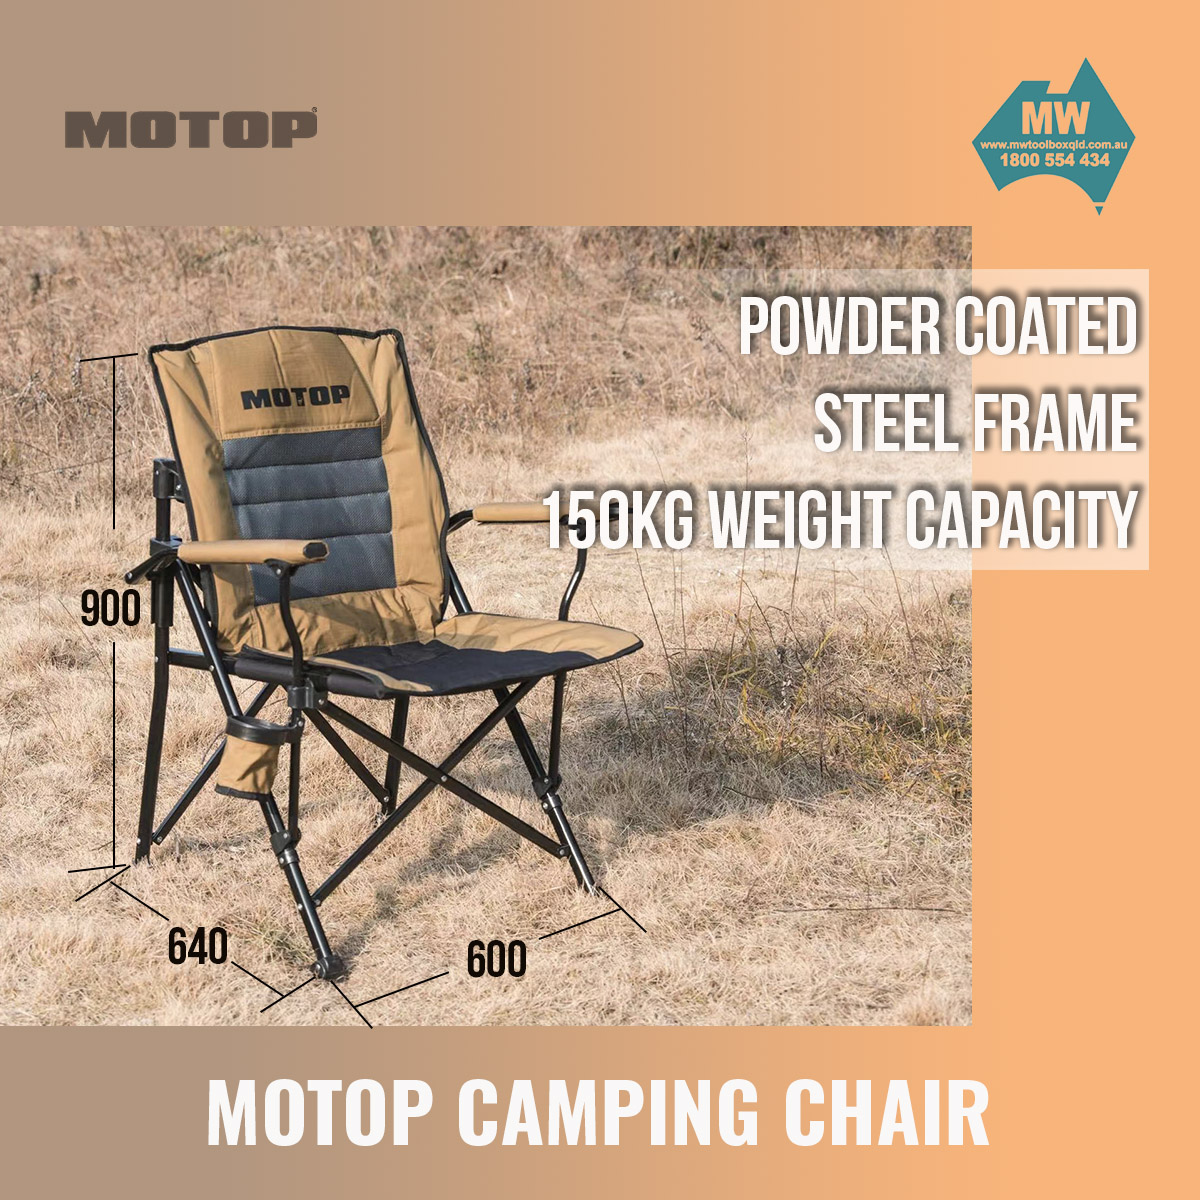 Motop-Camping-Chair-1